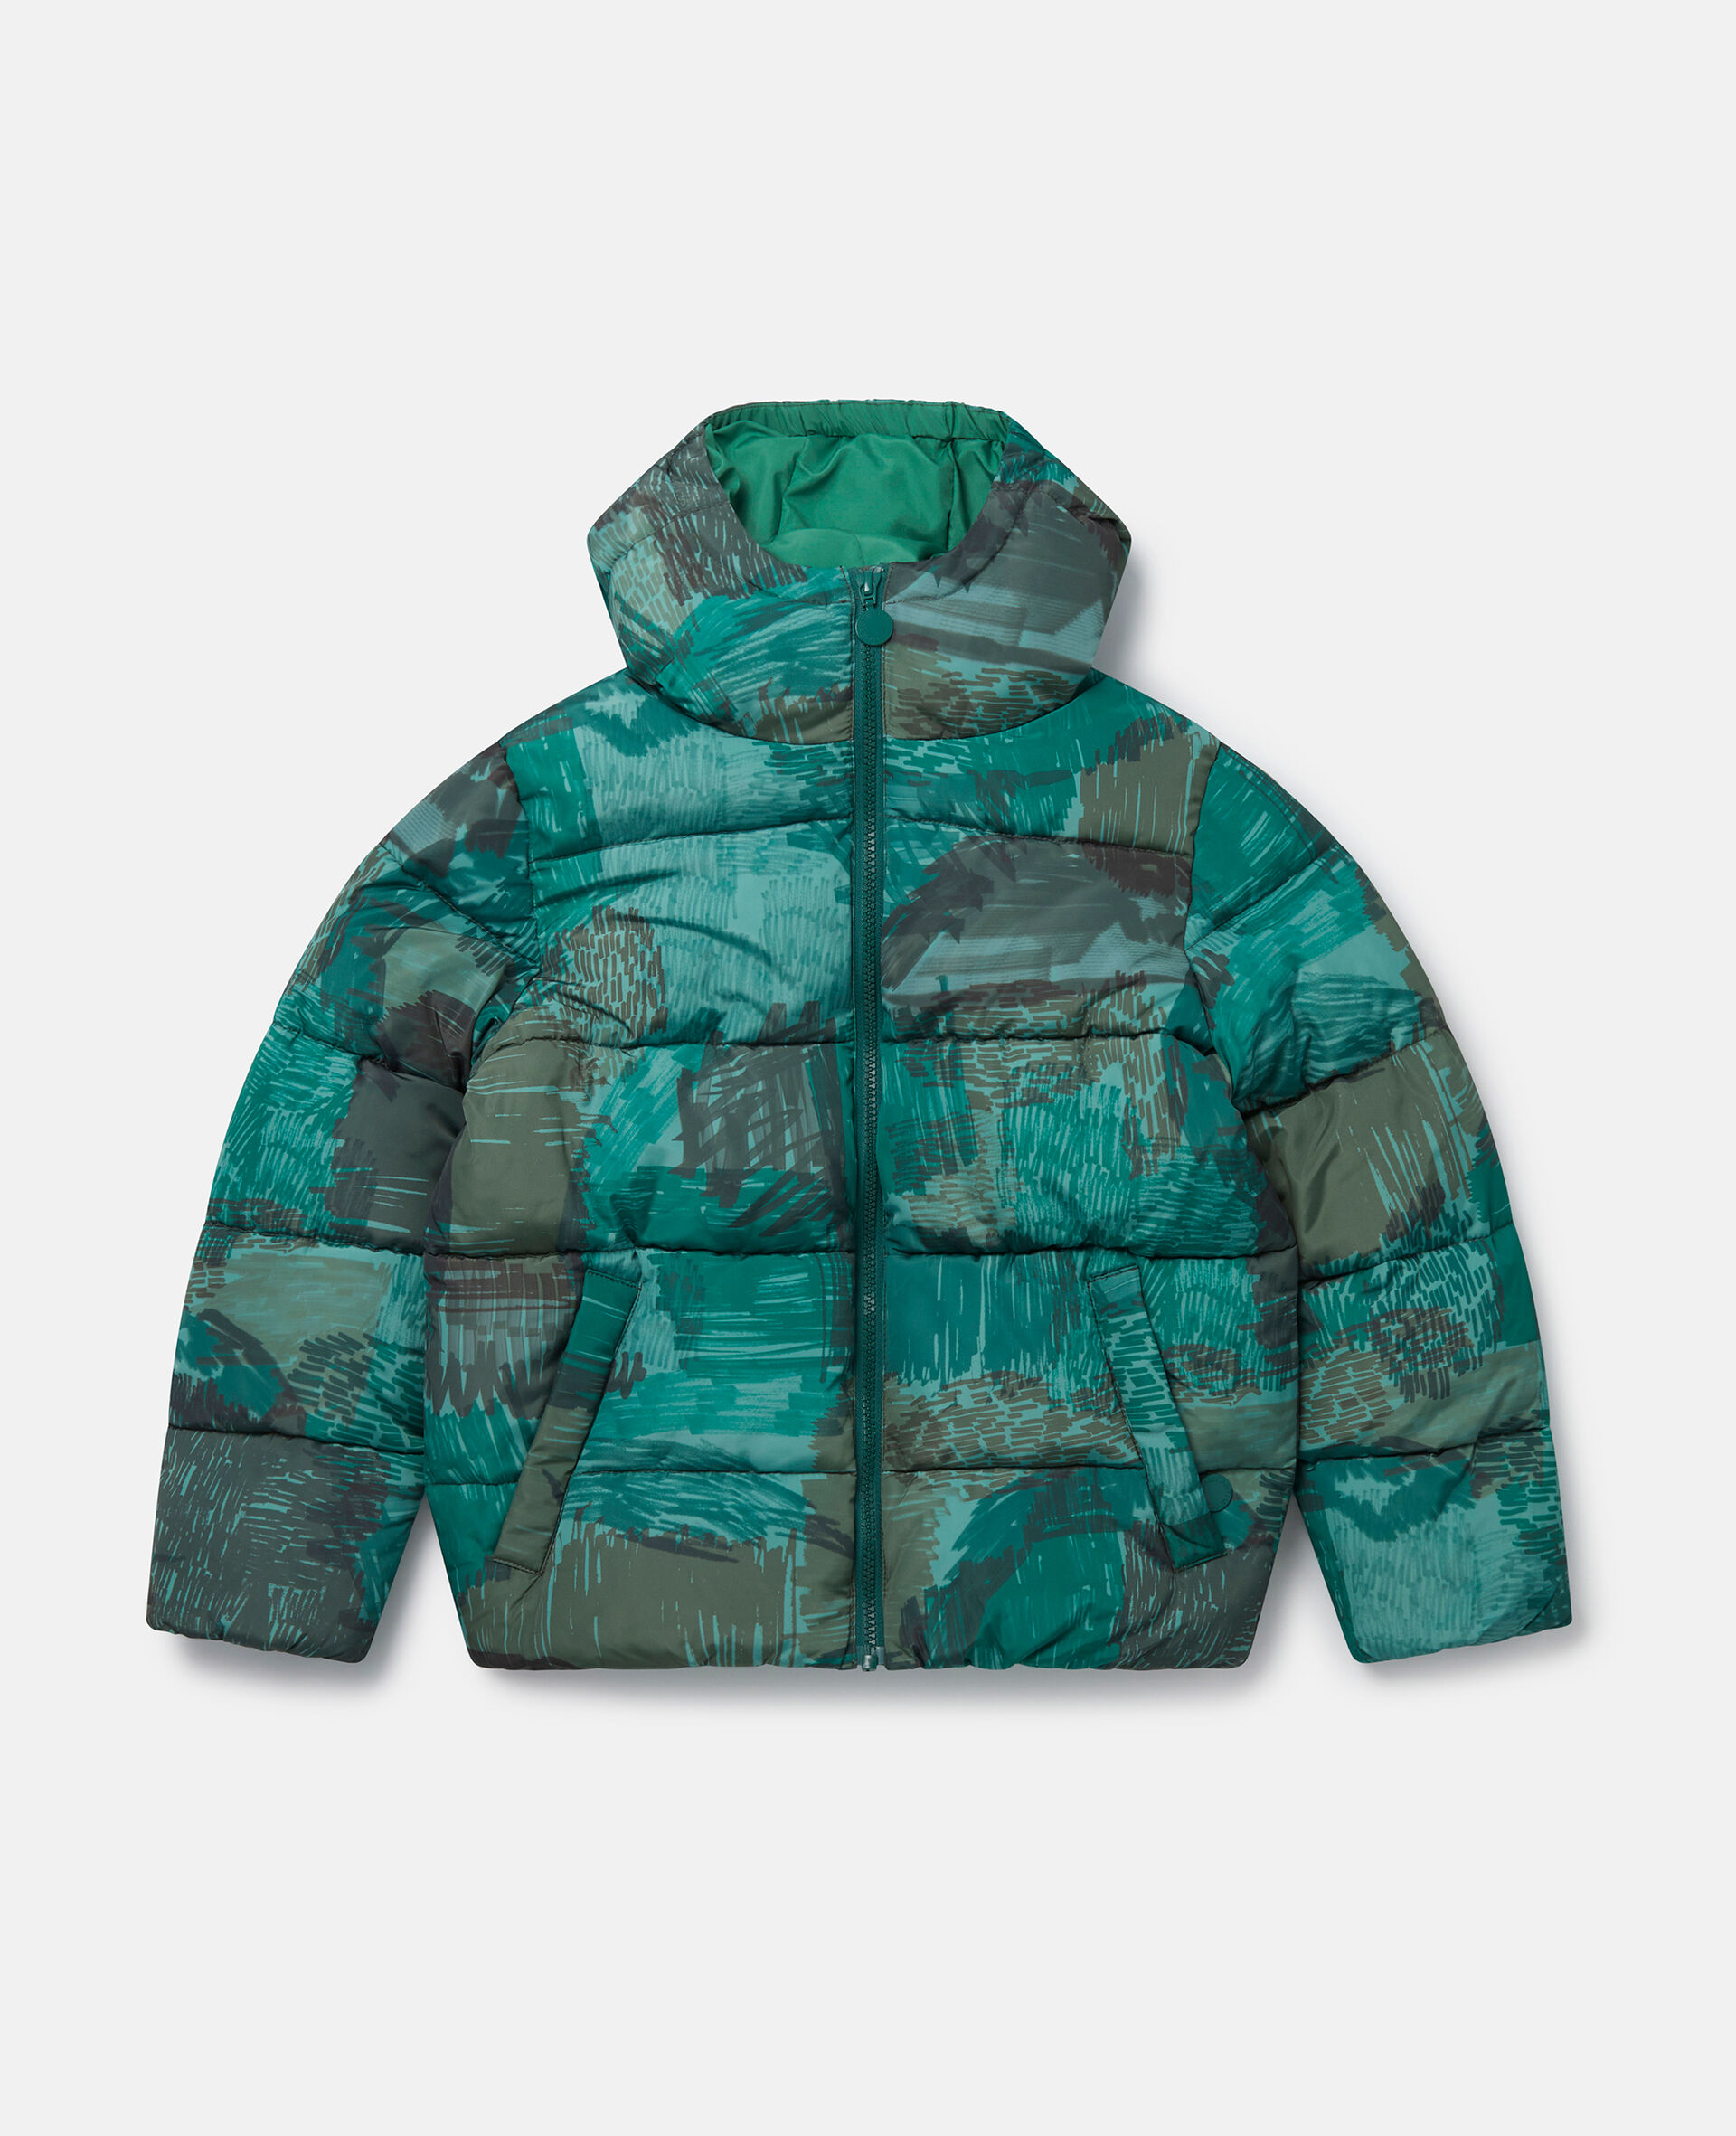 Scribble Print Hooded Puffer Coat-Green-large image number 0